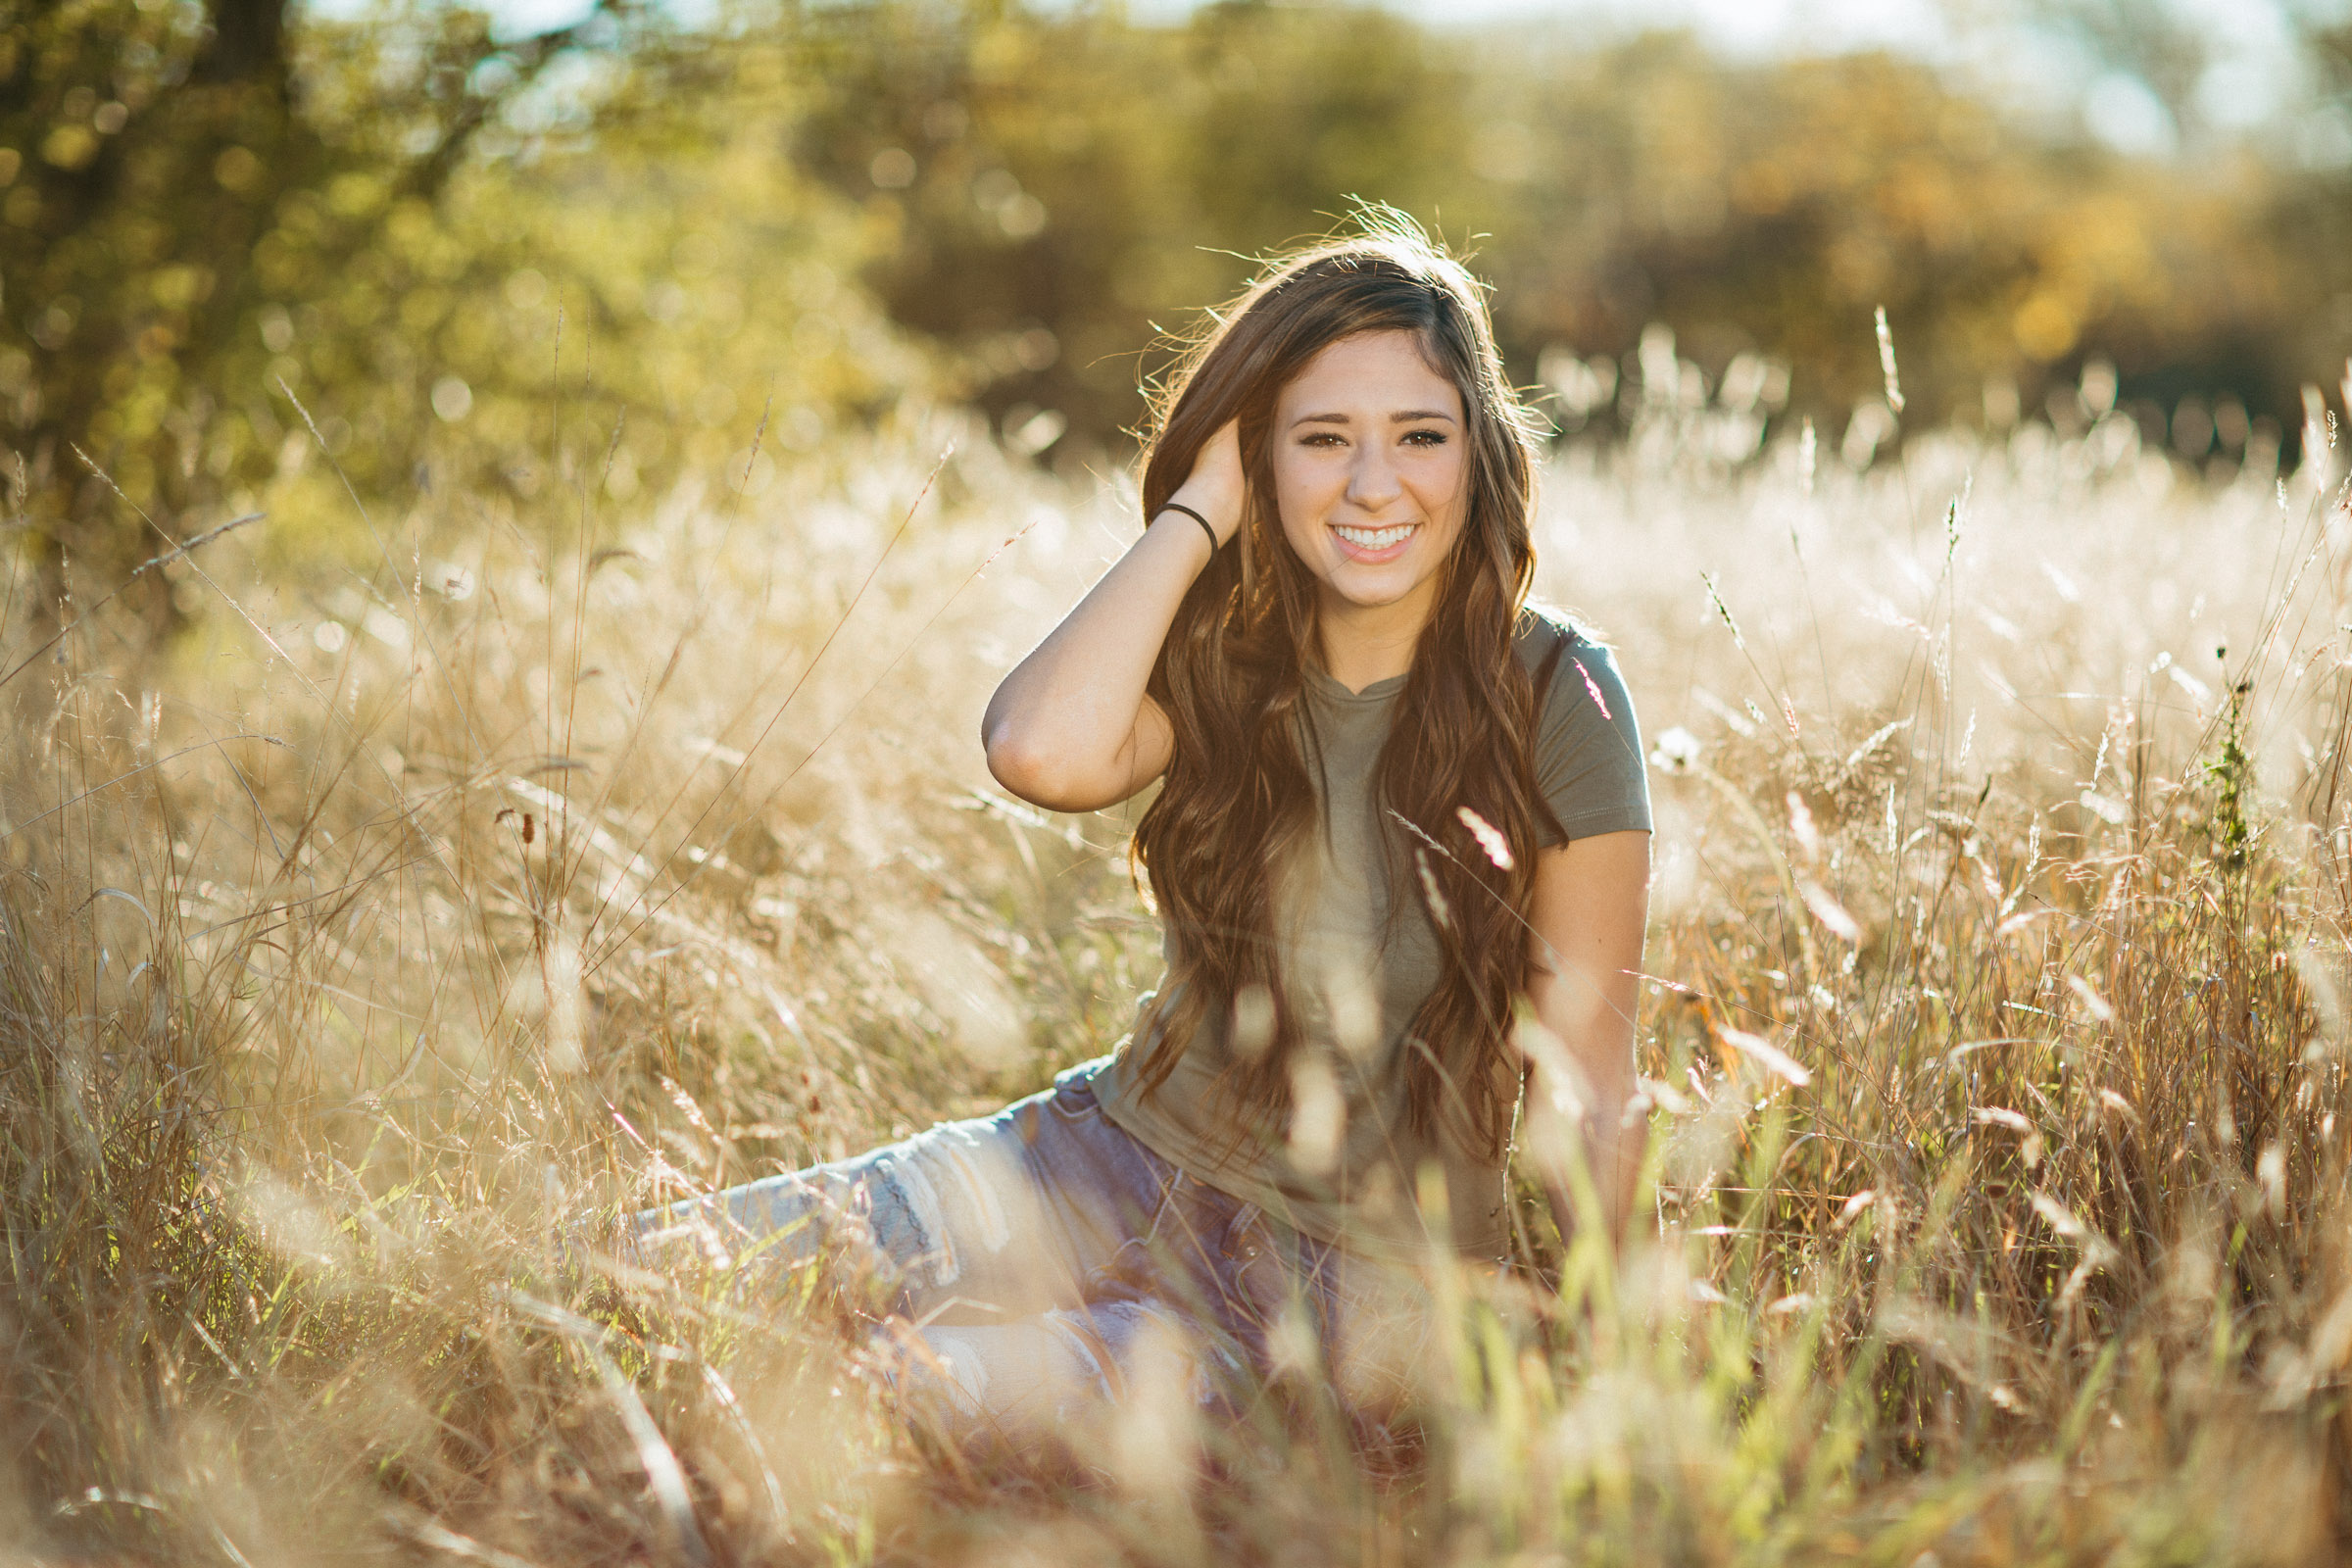 High school senior wearing a white dress sitting in a grassy knoll with late afternoon sun glowing from behind.